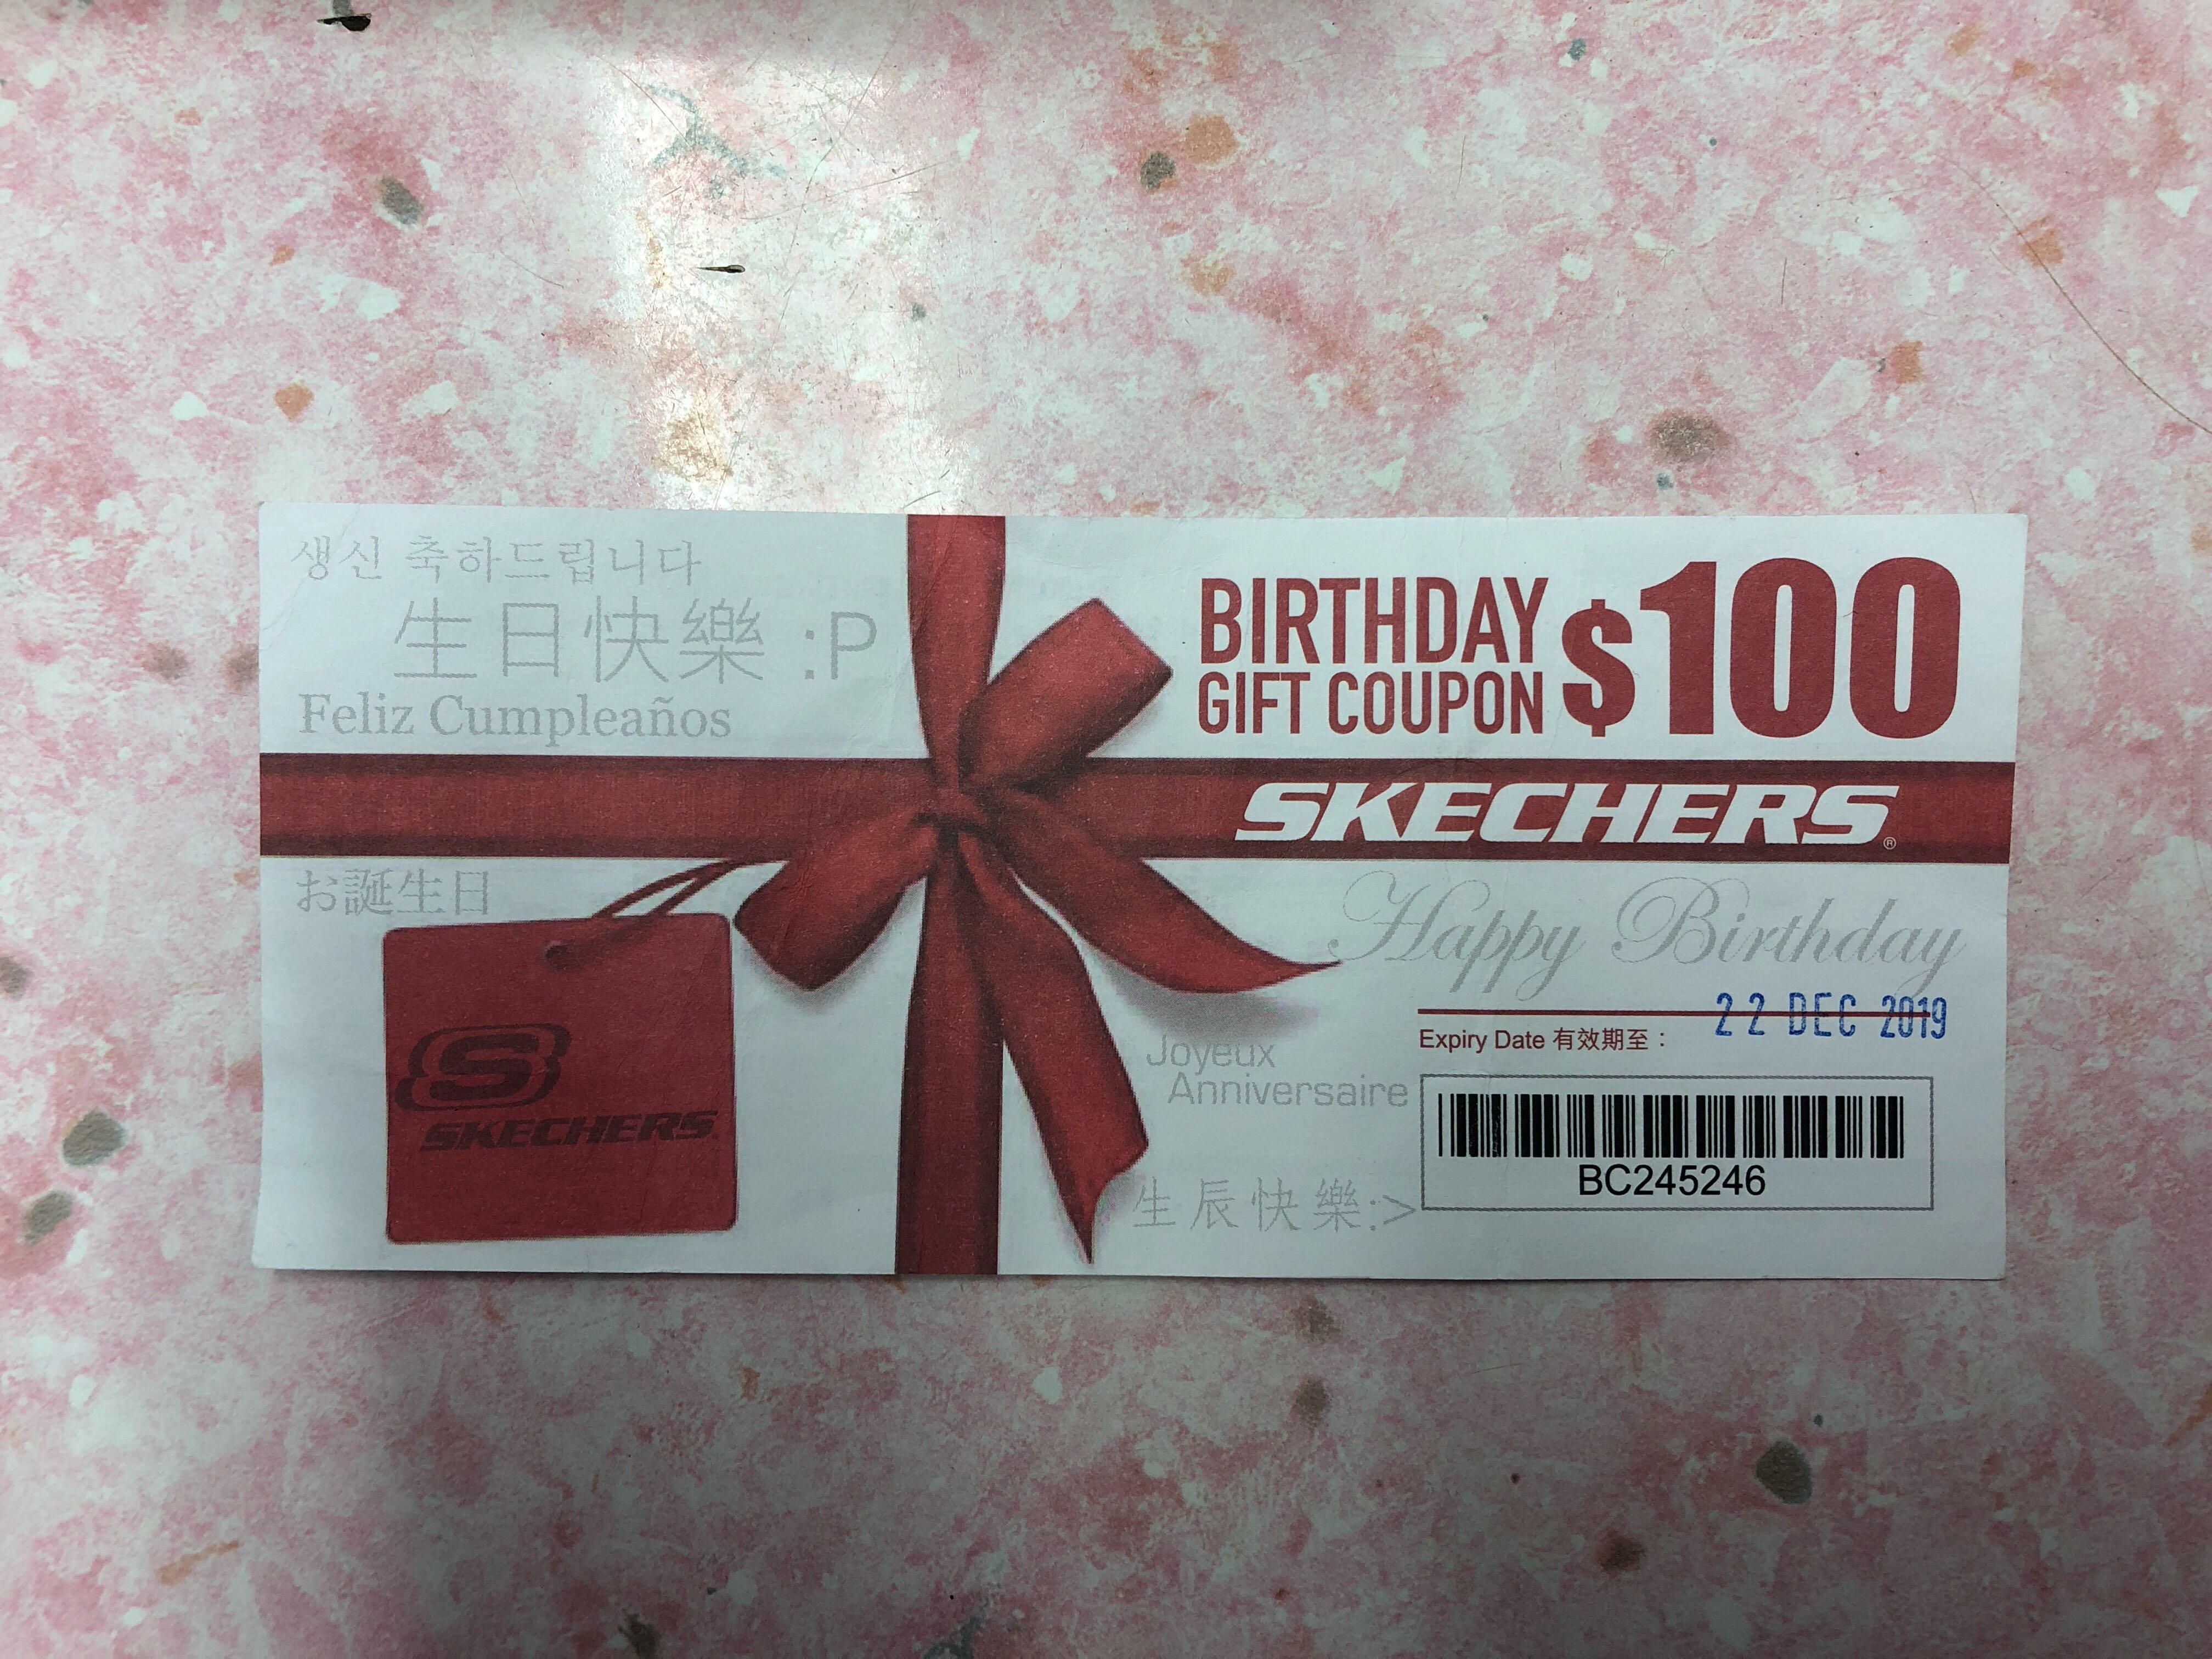 skechers in store coupons 2018